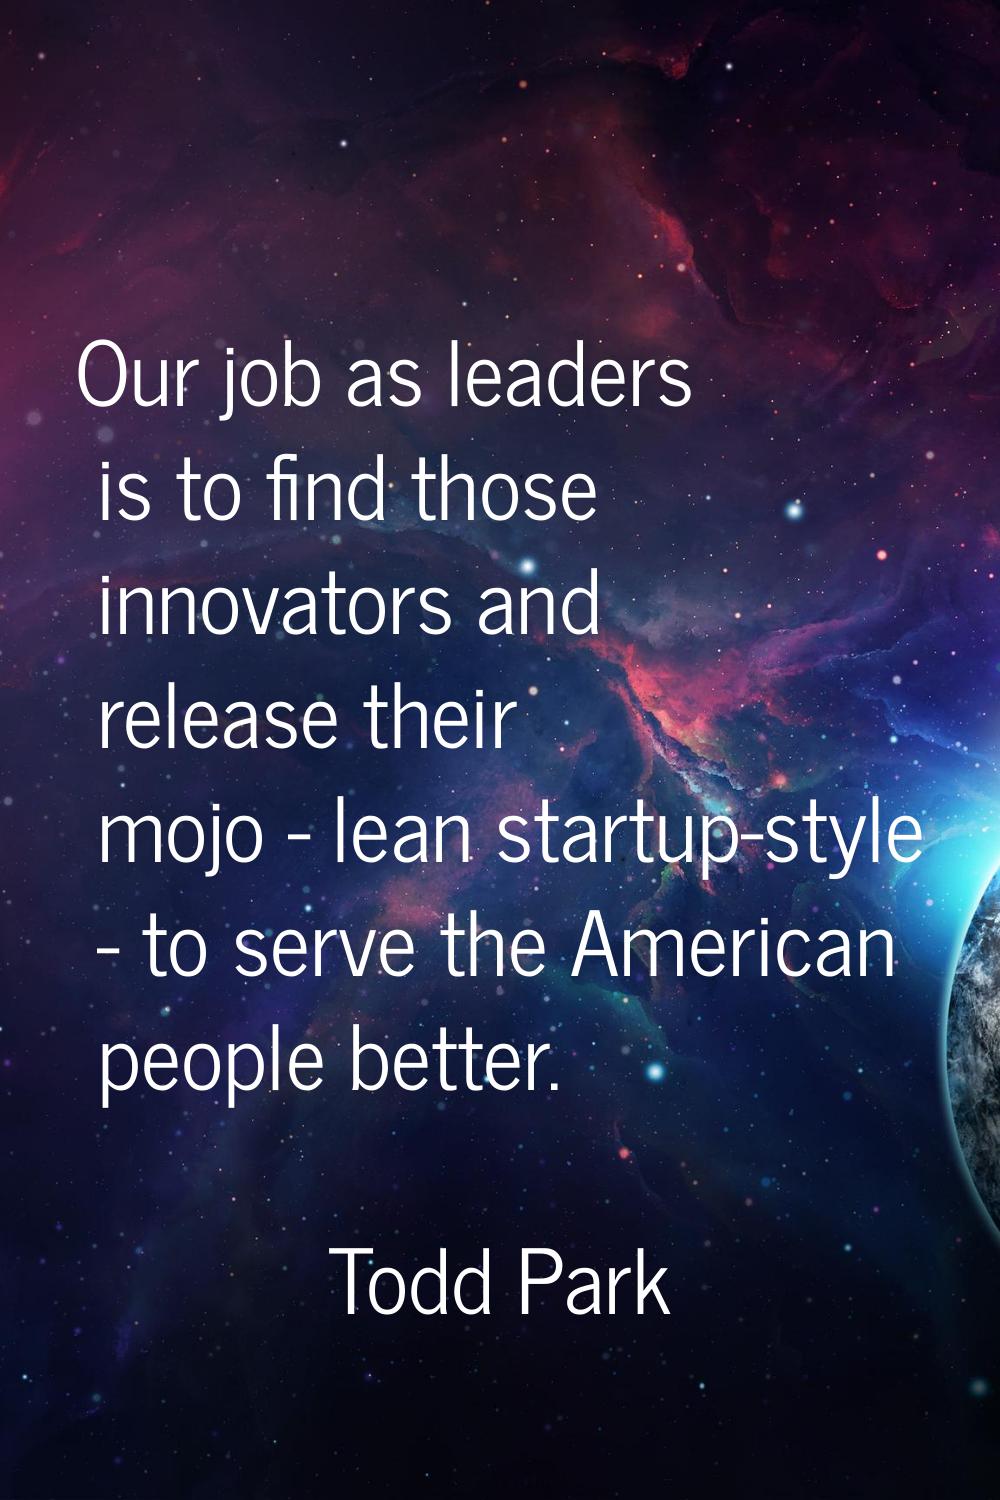 Our job as leaders is to find those innovators and release their mojo - lean startup-style - to ser